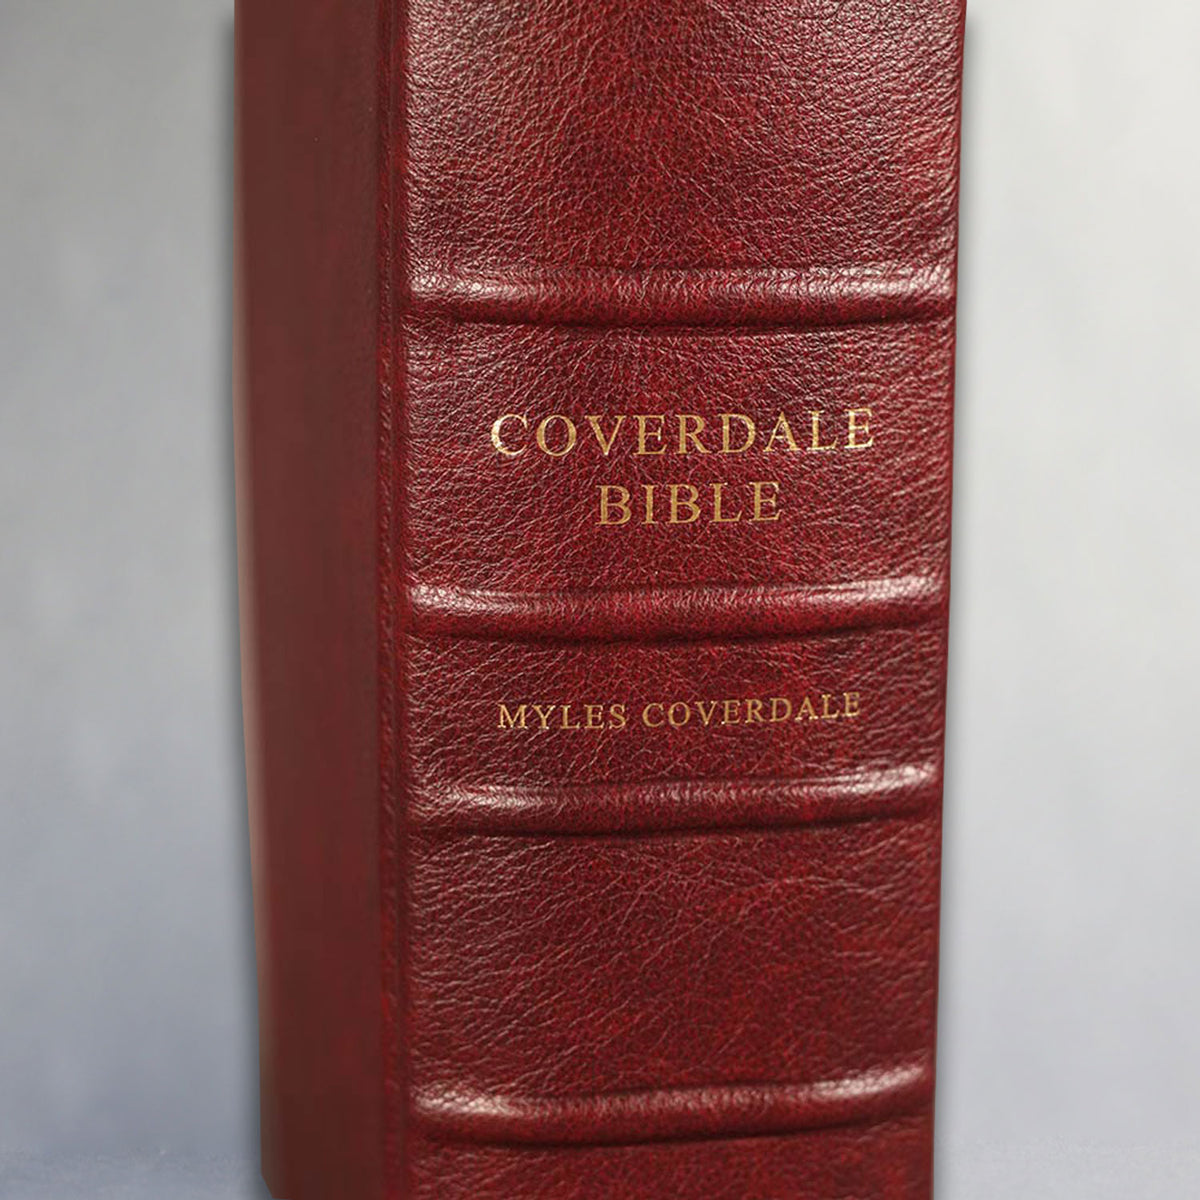 Coverdale Bible - 1535 First Edition Facsimile Carroll Revelation Vino (Burgundy) Leather